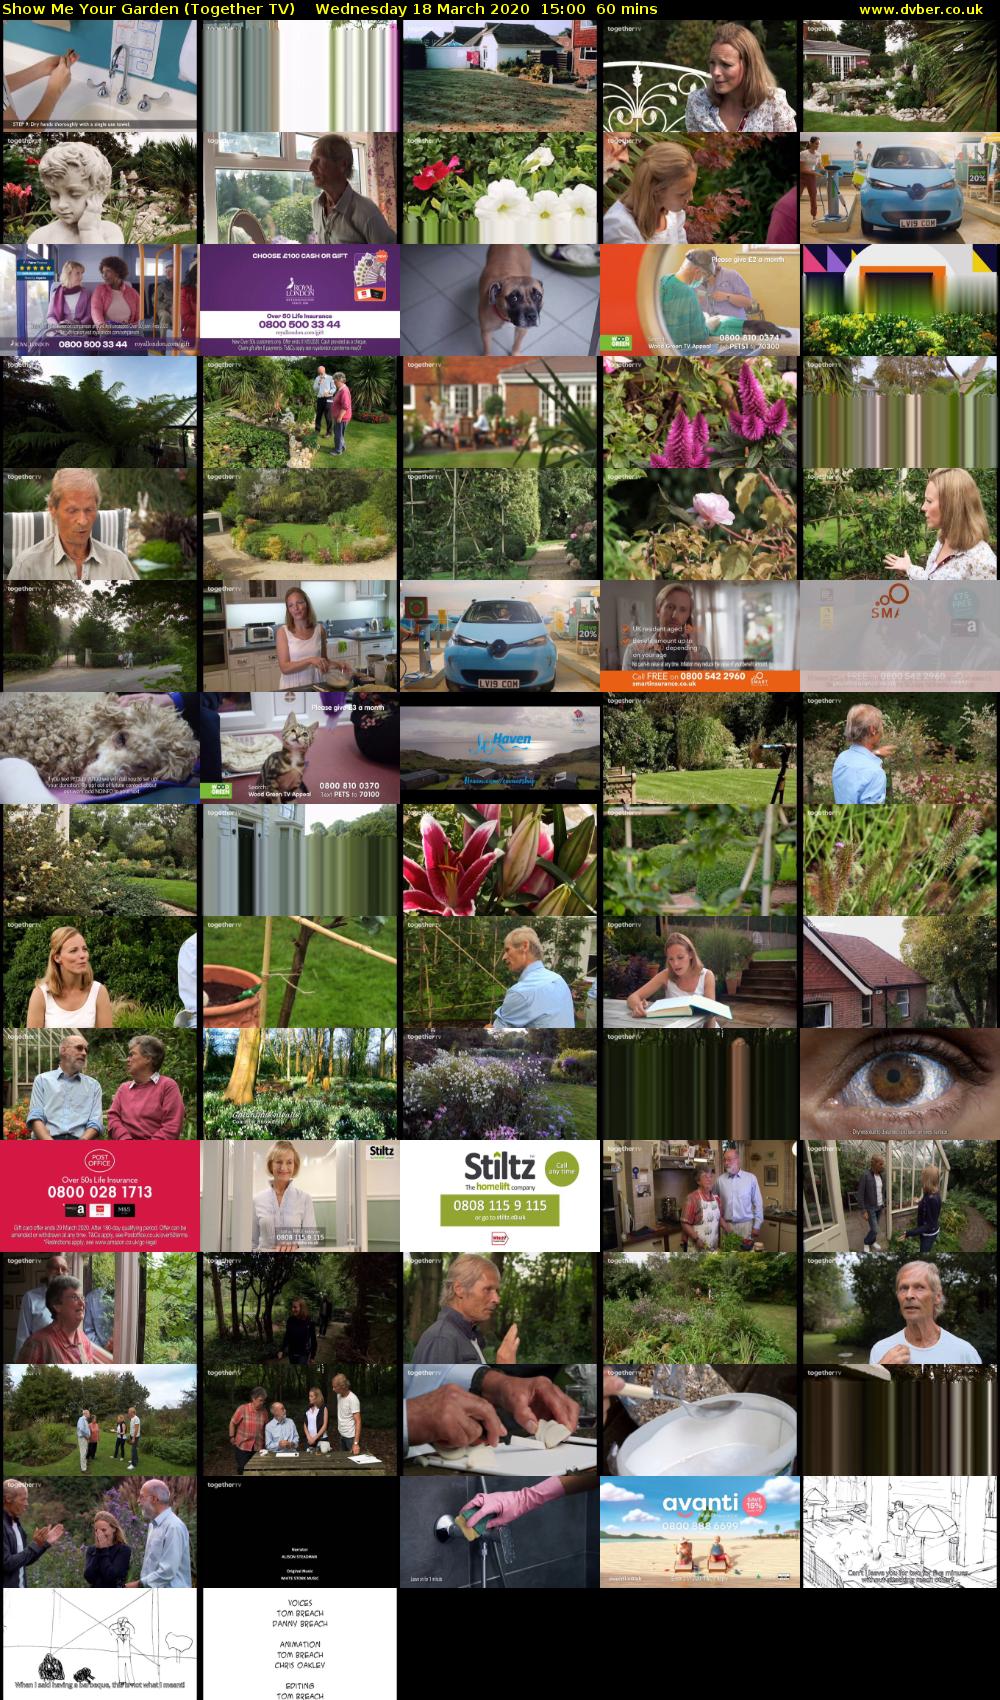 Show Me Your Garden (Together TV) Wednesday 18 March 2020 15:00 - 16:00